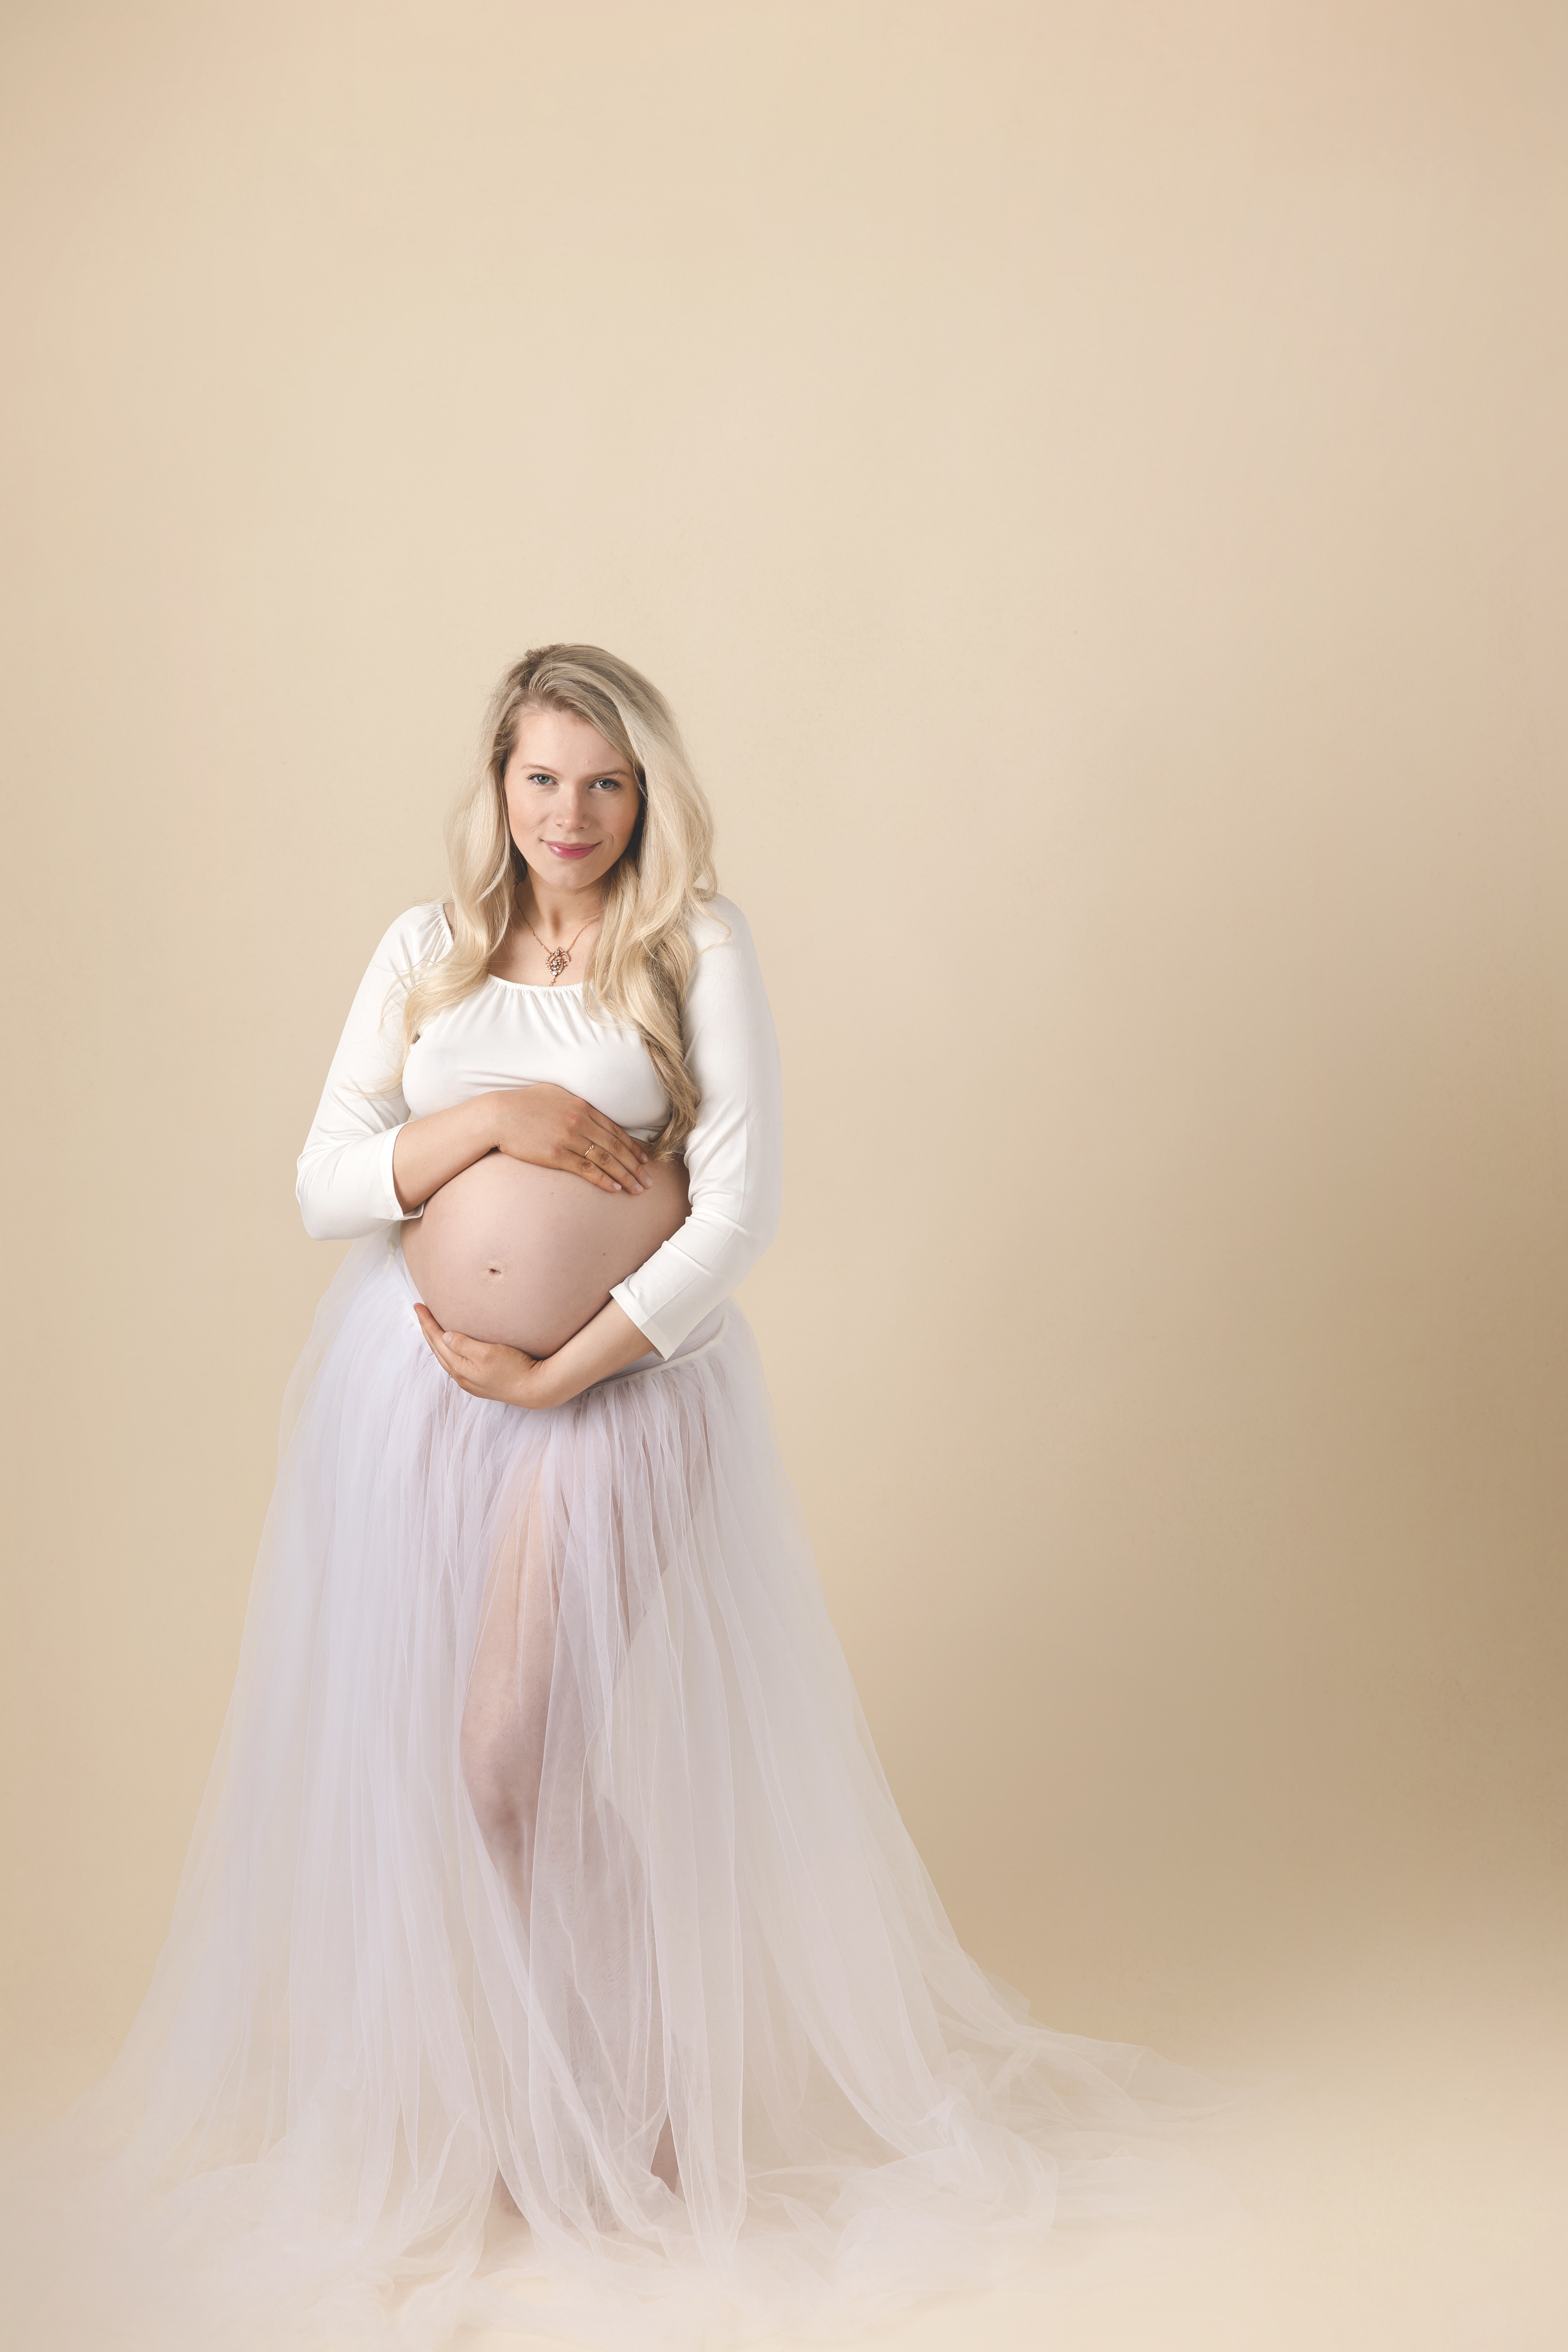 Simplicity in Maternity Photos - June Bug Photography, Mill Creek